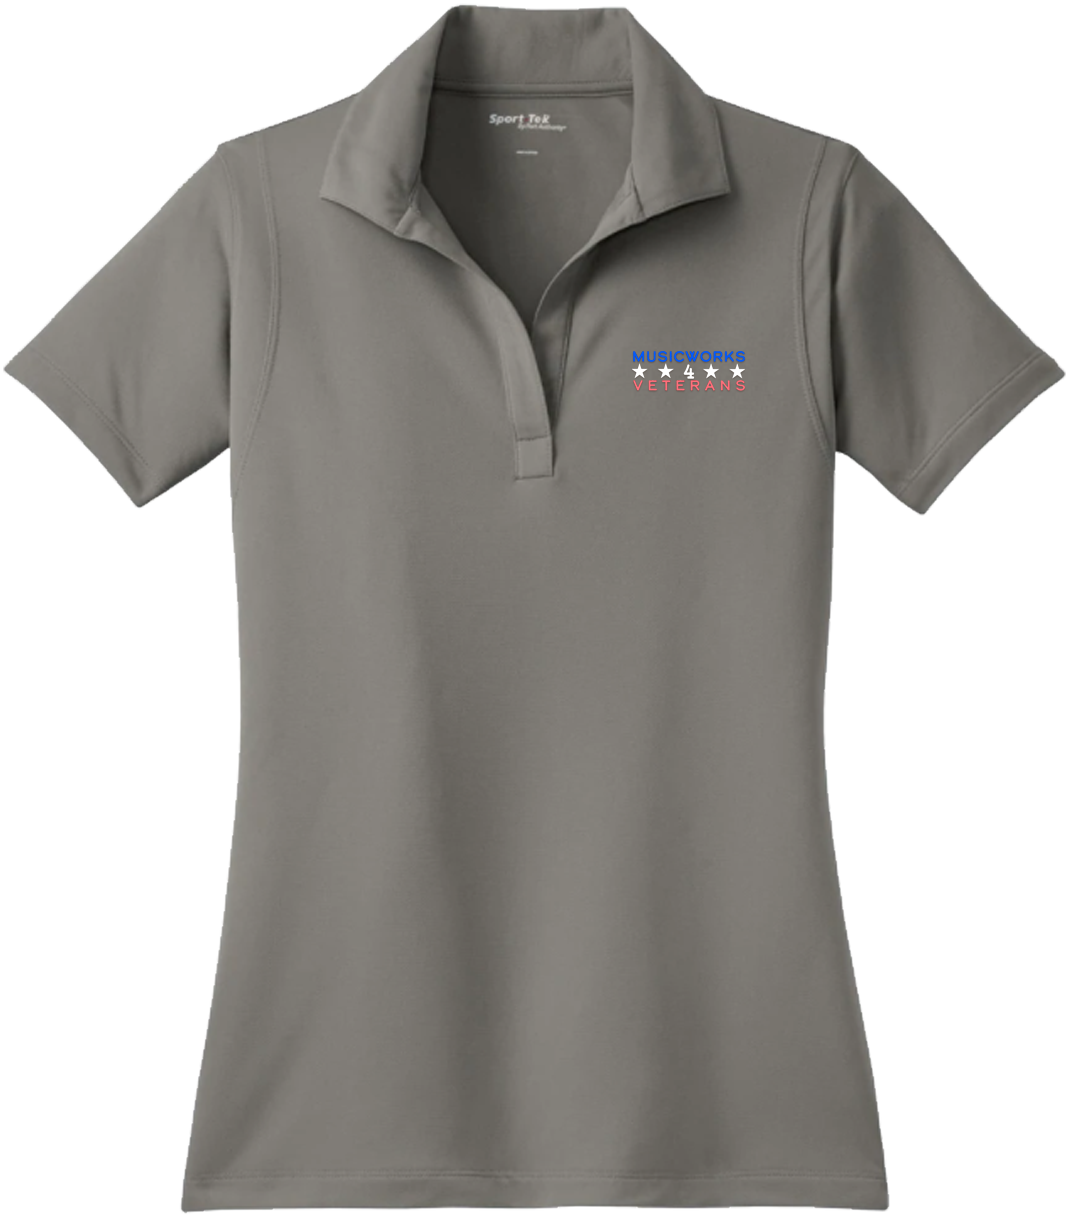 MW4V embroidered women's polo